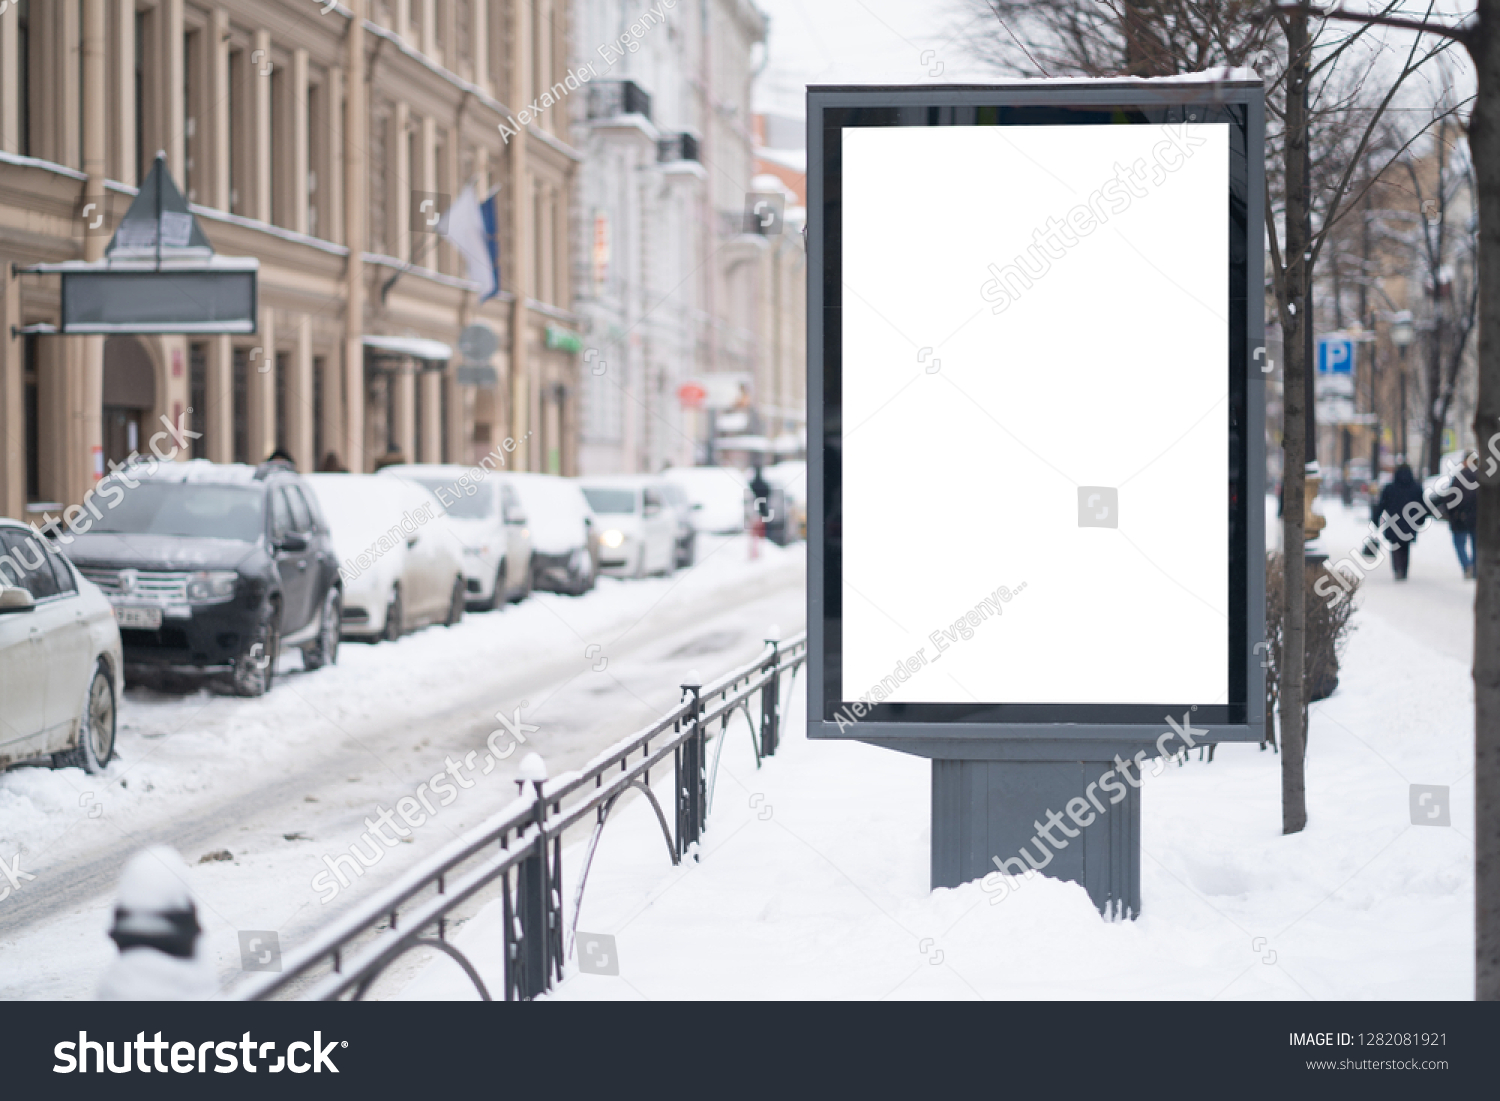 Vertical mock-up of city poster winter city with thick edges, blank white billboard in urban settings, empty street information placeholder on sidewalk with copy space for logo #1282081921